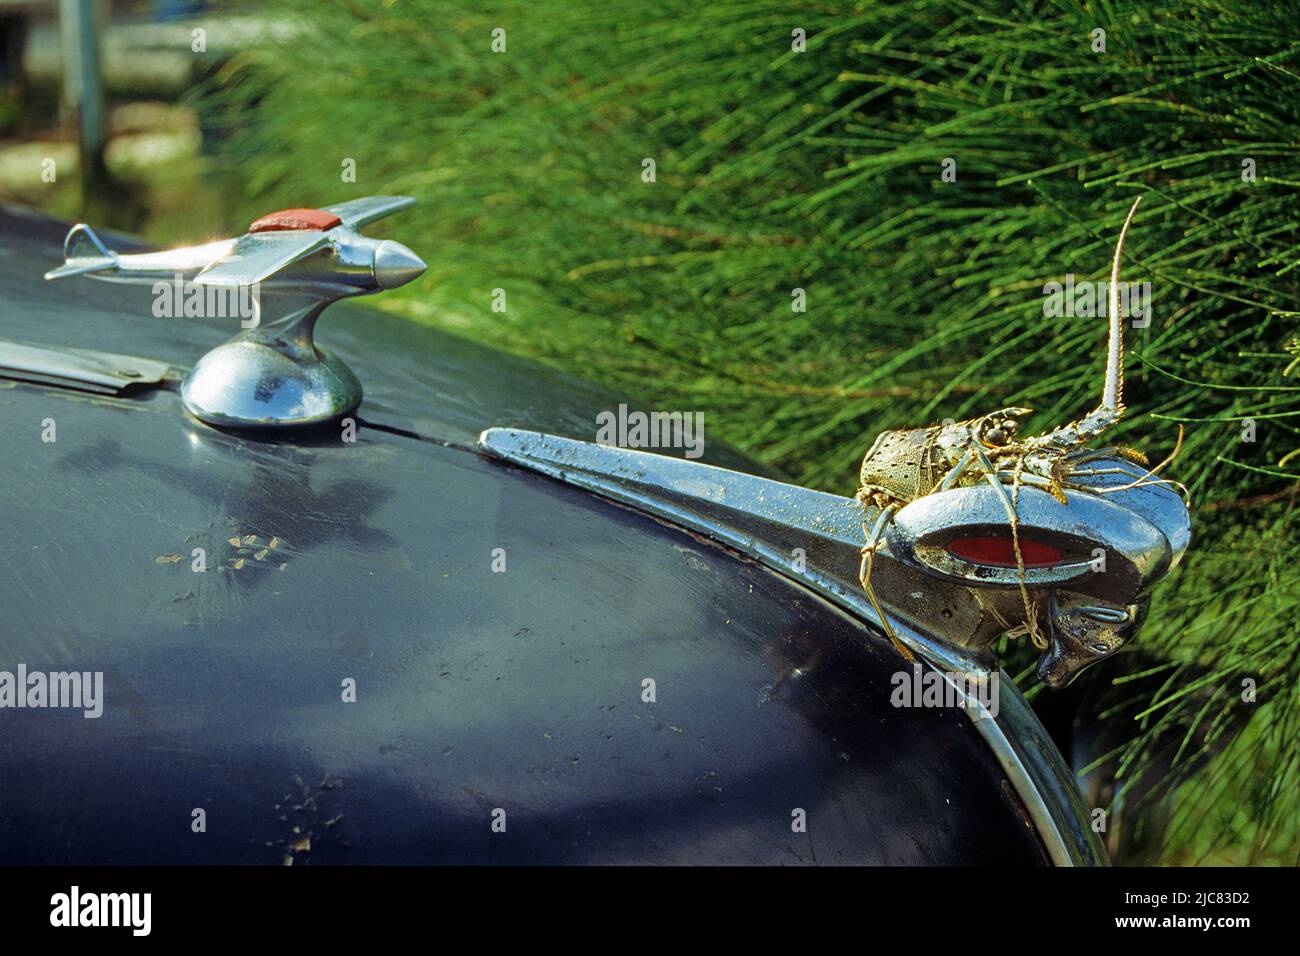 Classic car, lobster and airplane used as a hood ornament, old town of Havana, Cuba, Caribbean Stock Photo